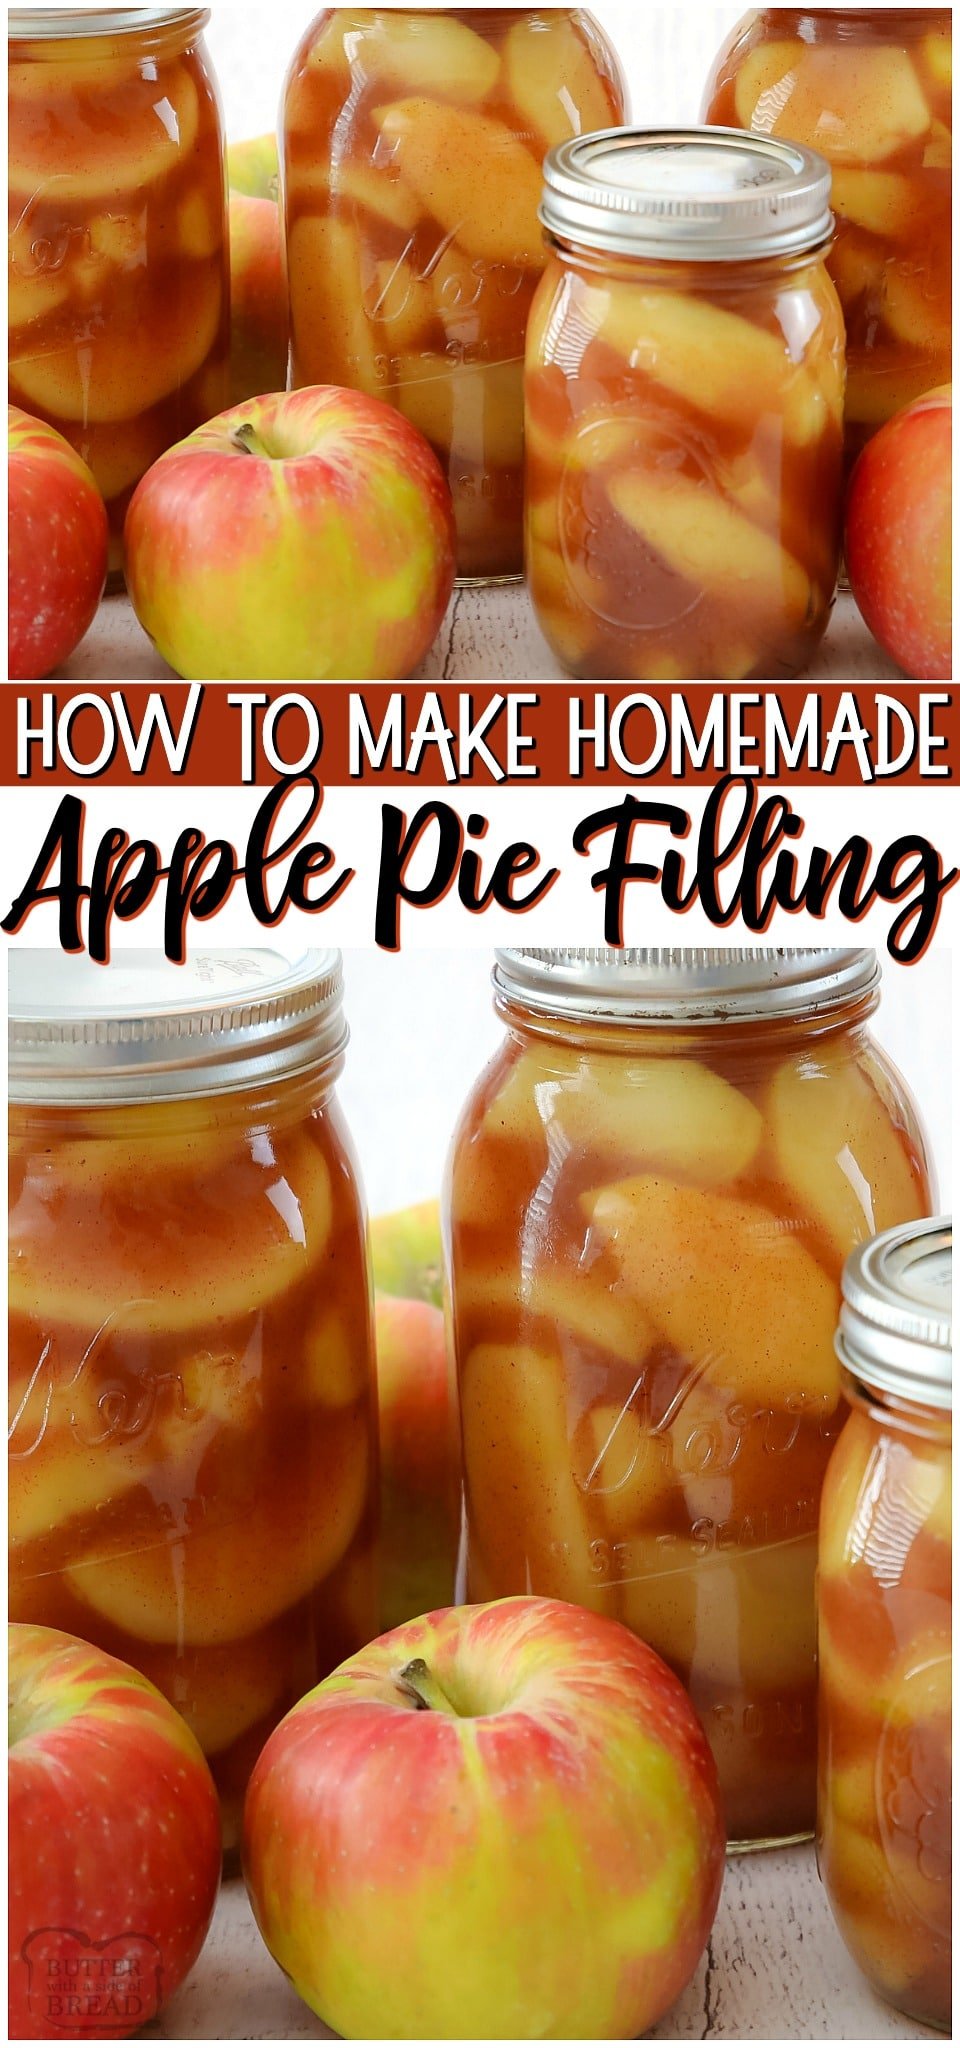 Learn how to make apple pie filling with this simple method & recipe! This is a low sugar apple pie filling so that the flavor of the apples really shine. Apple Pie Filling can be used in so many desserts and is a great way to use fresh apples when they're in season.